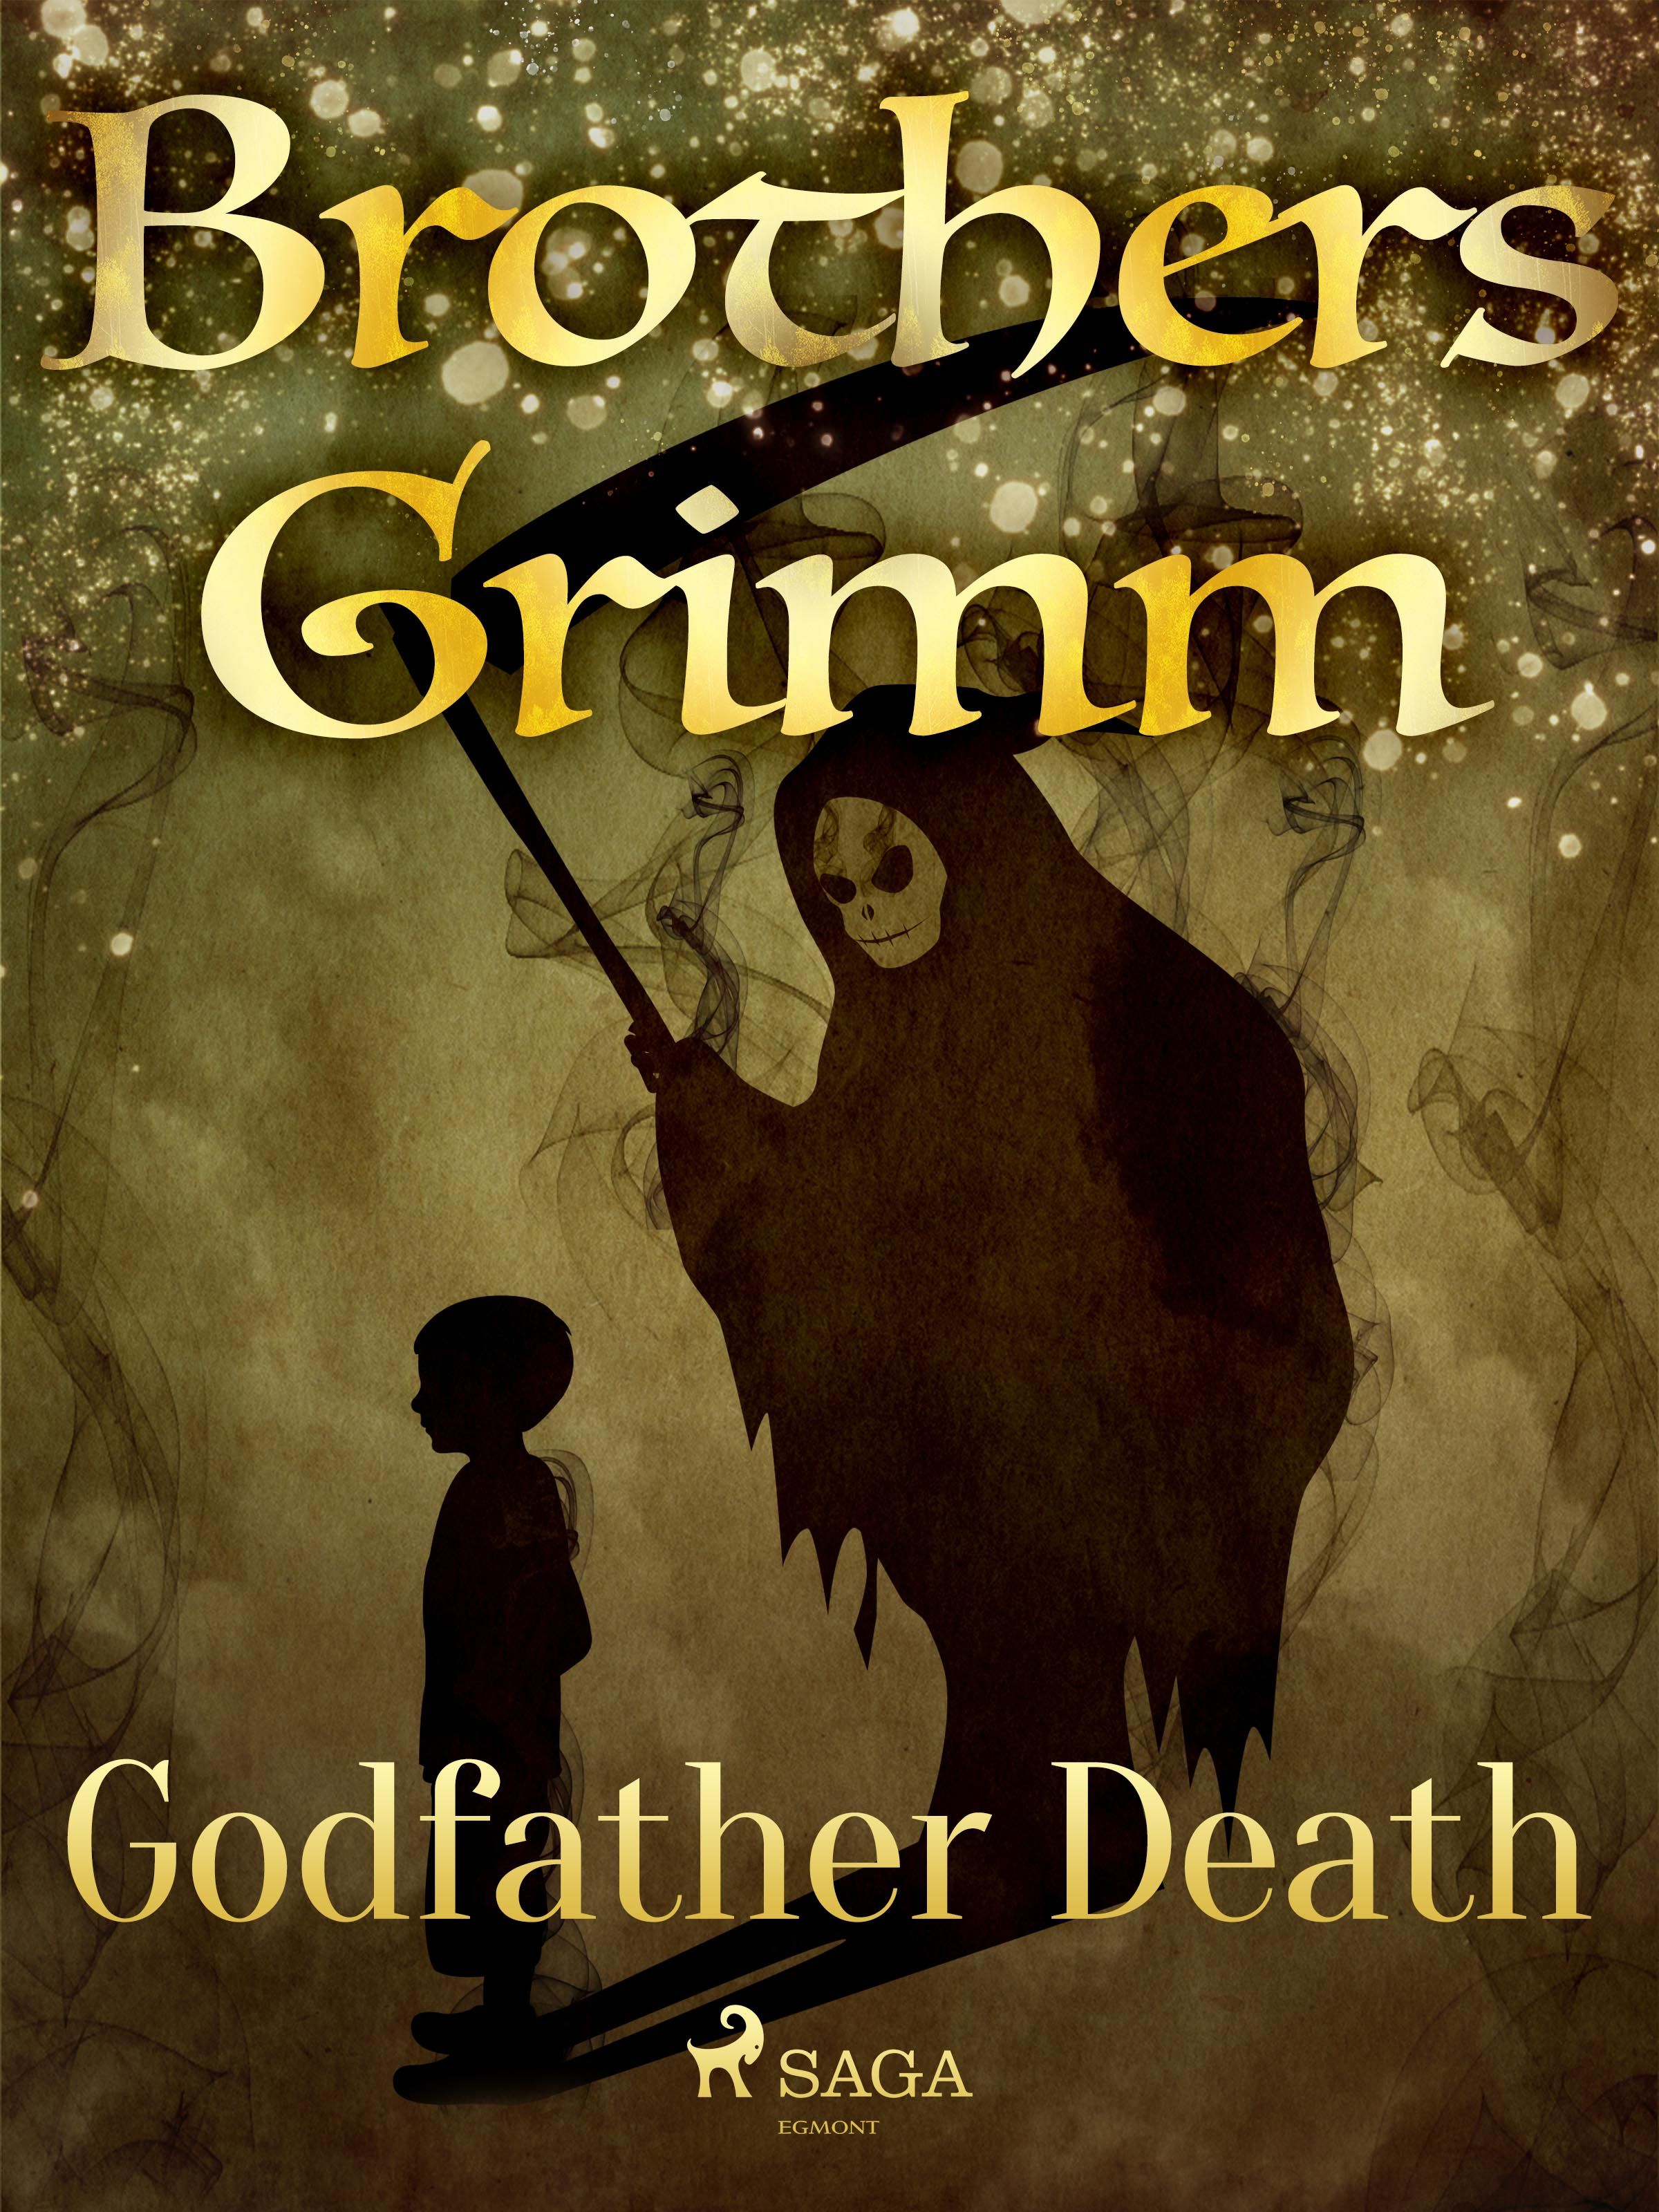 Godfather Death, eBook by Brothers Grimm